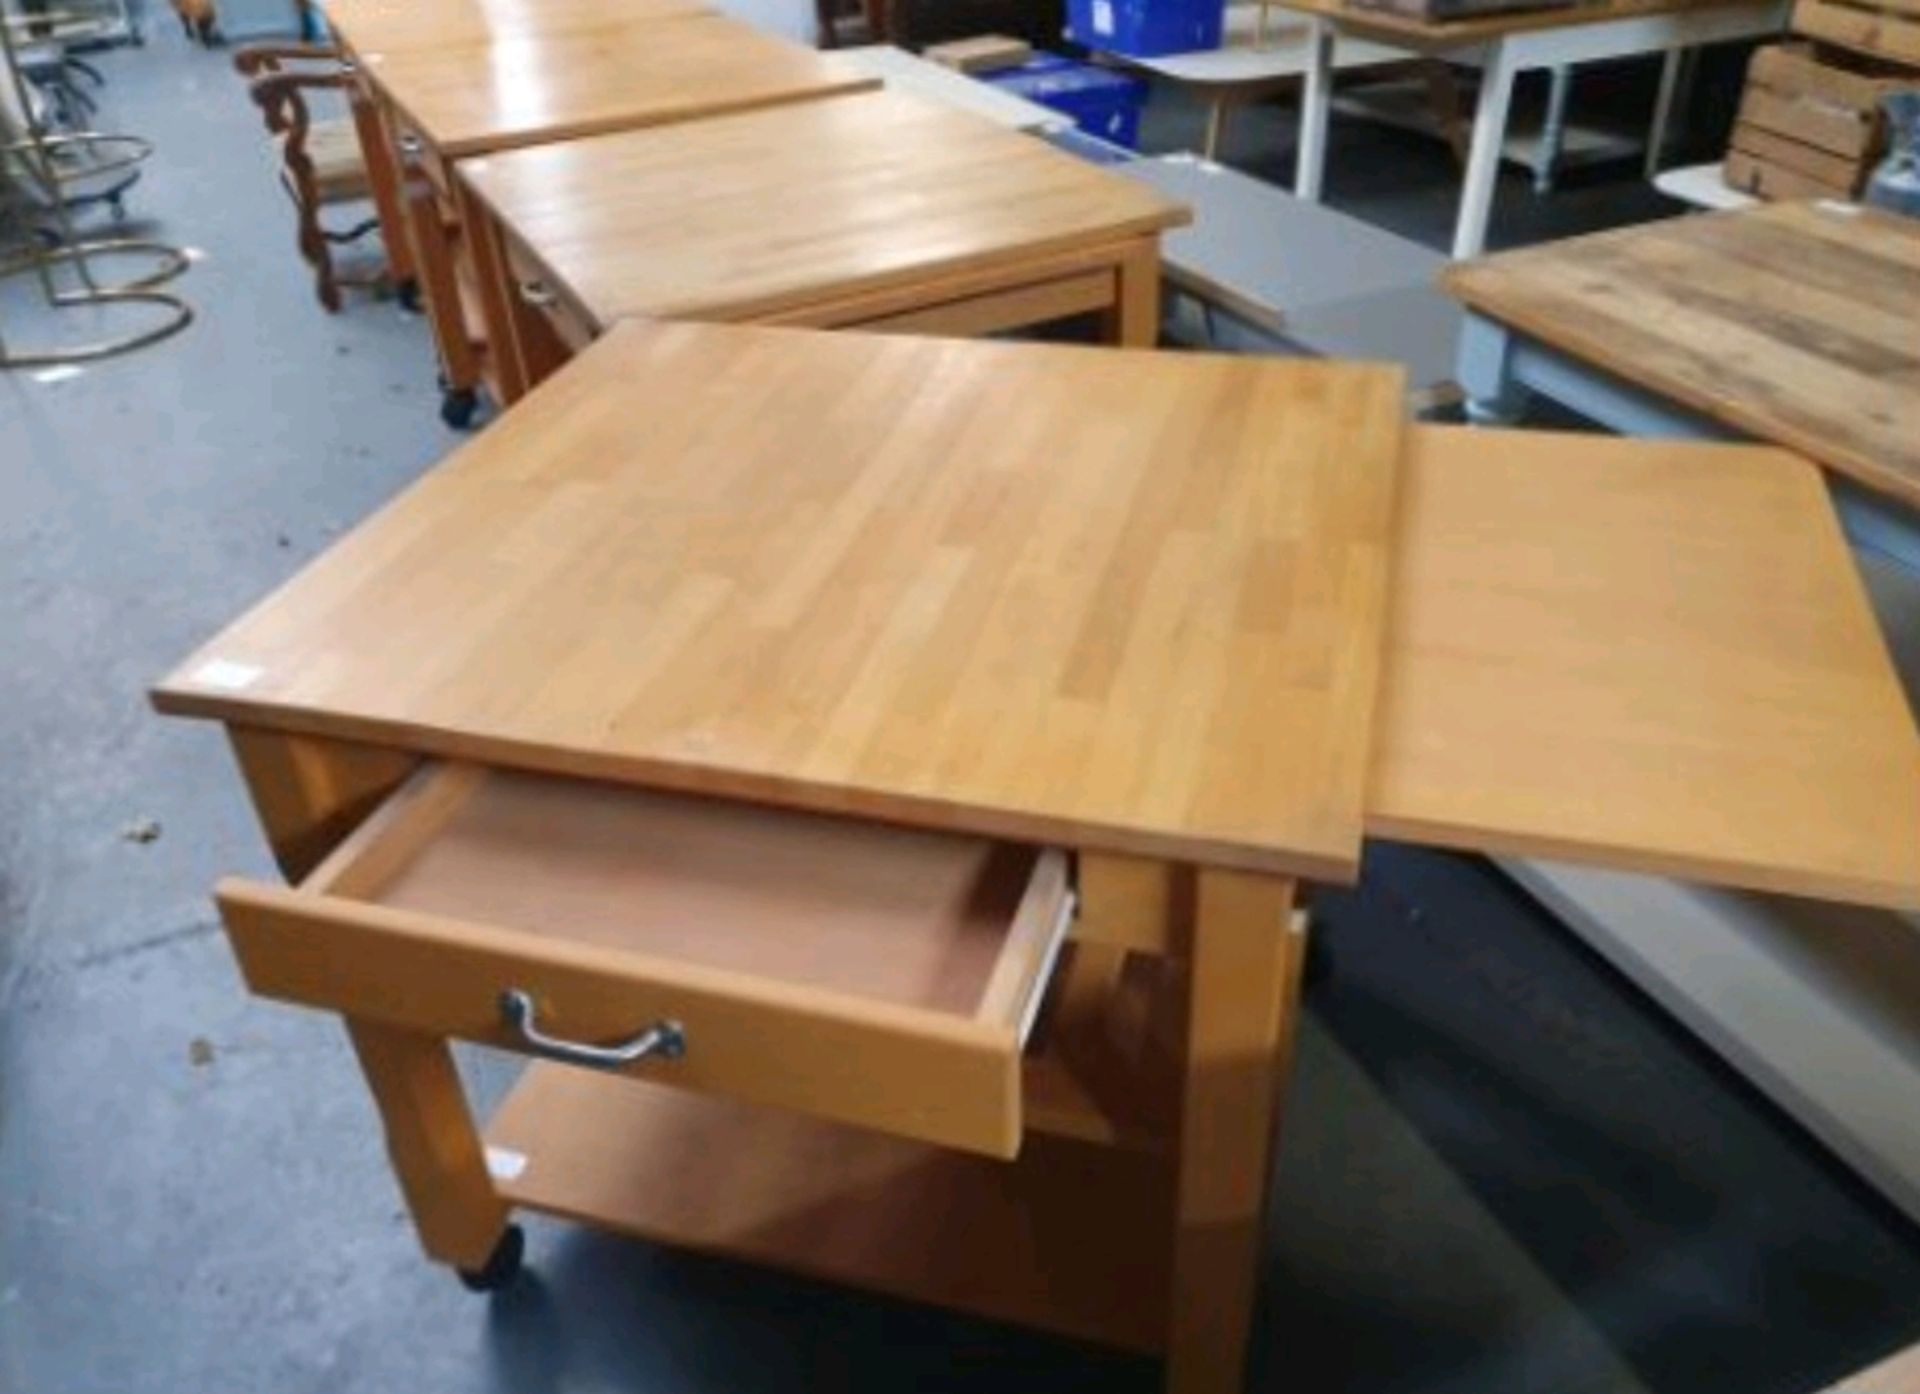 Square Table With Drawer and Slide Out Leaf - Image 2 of 2